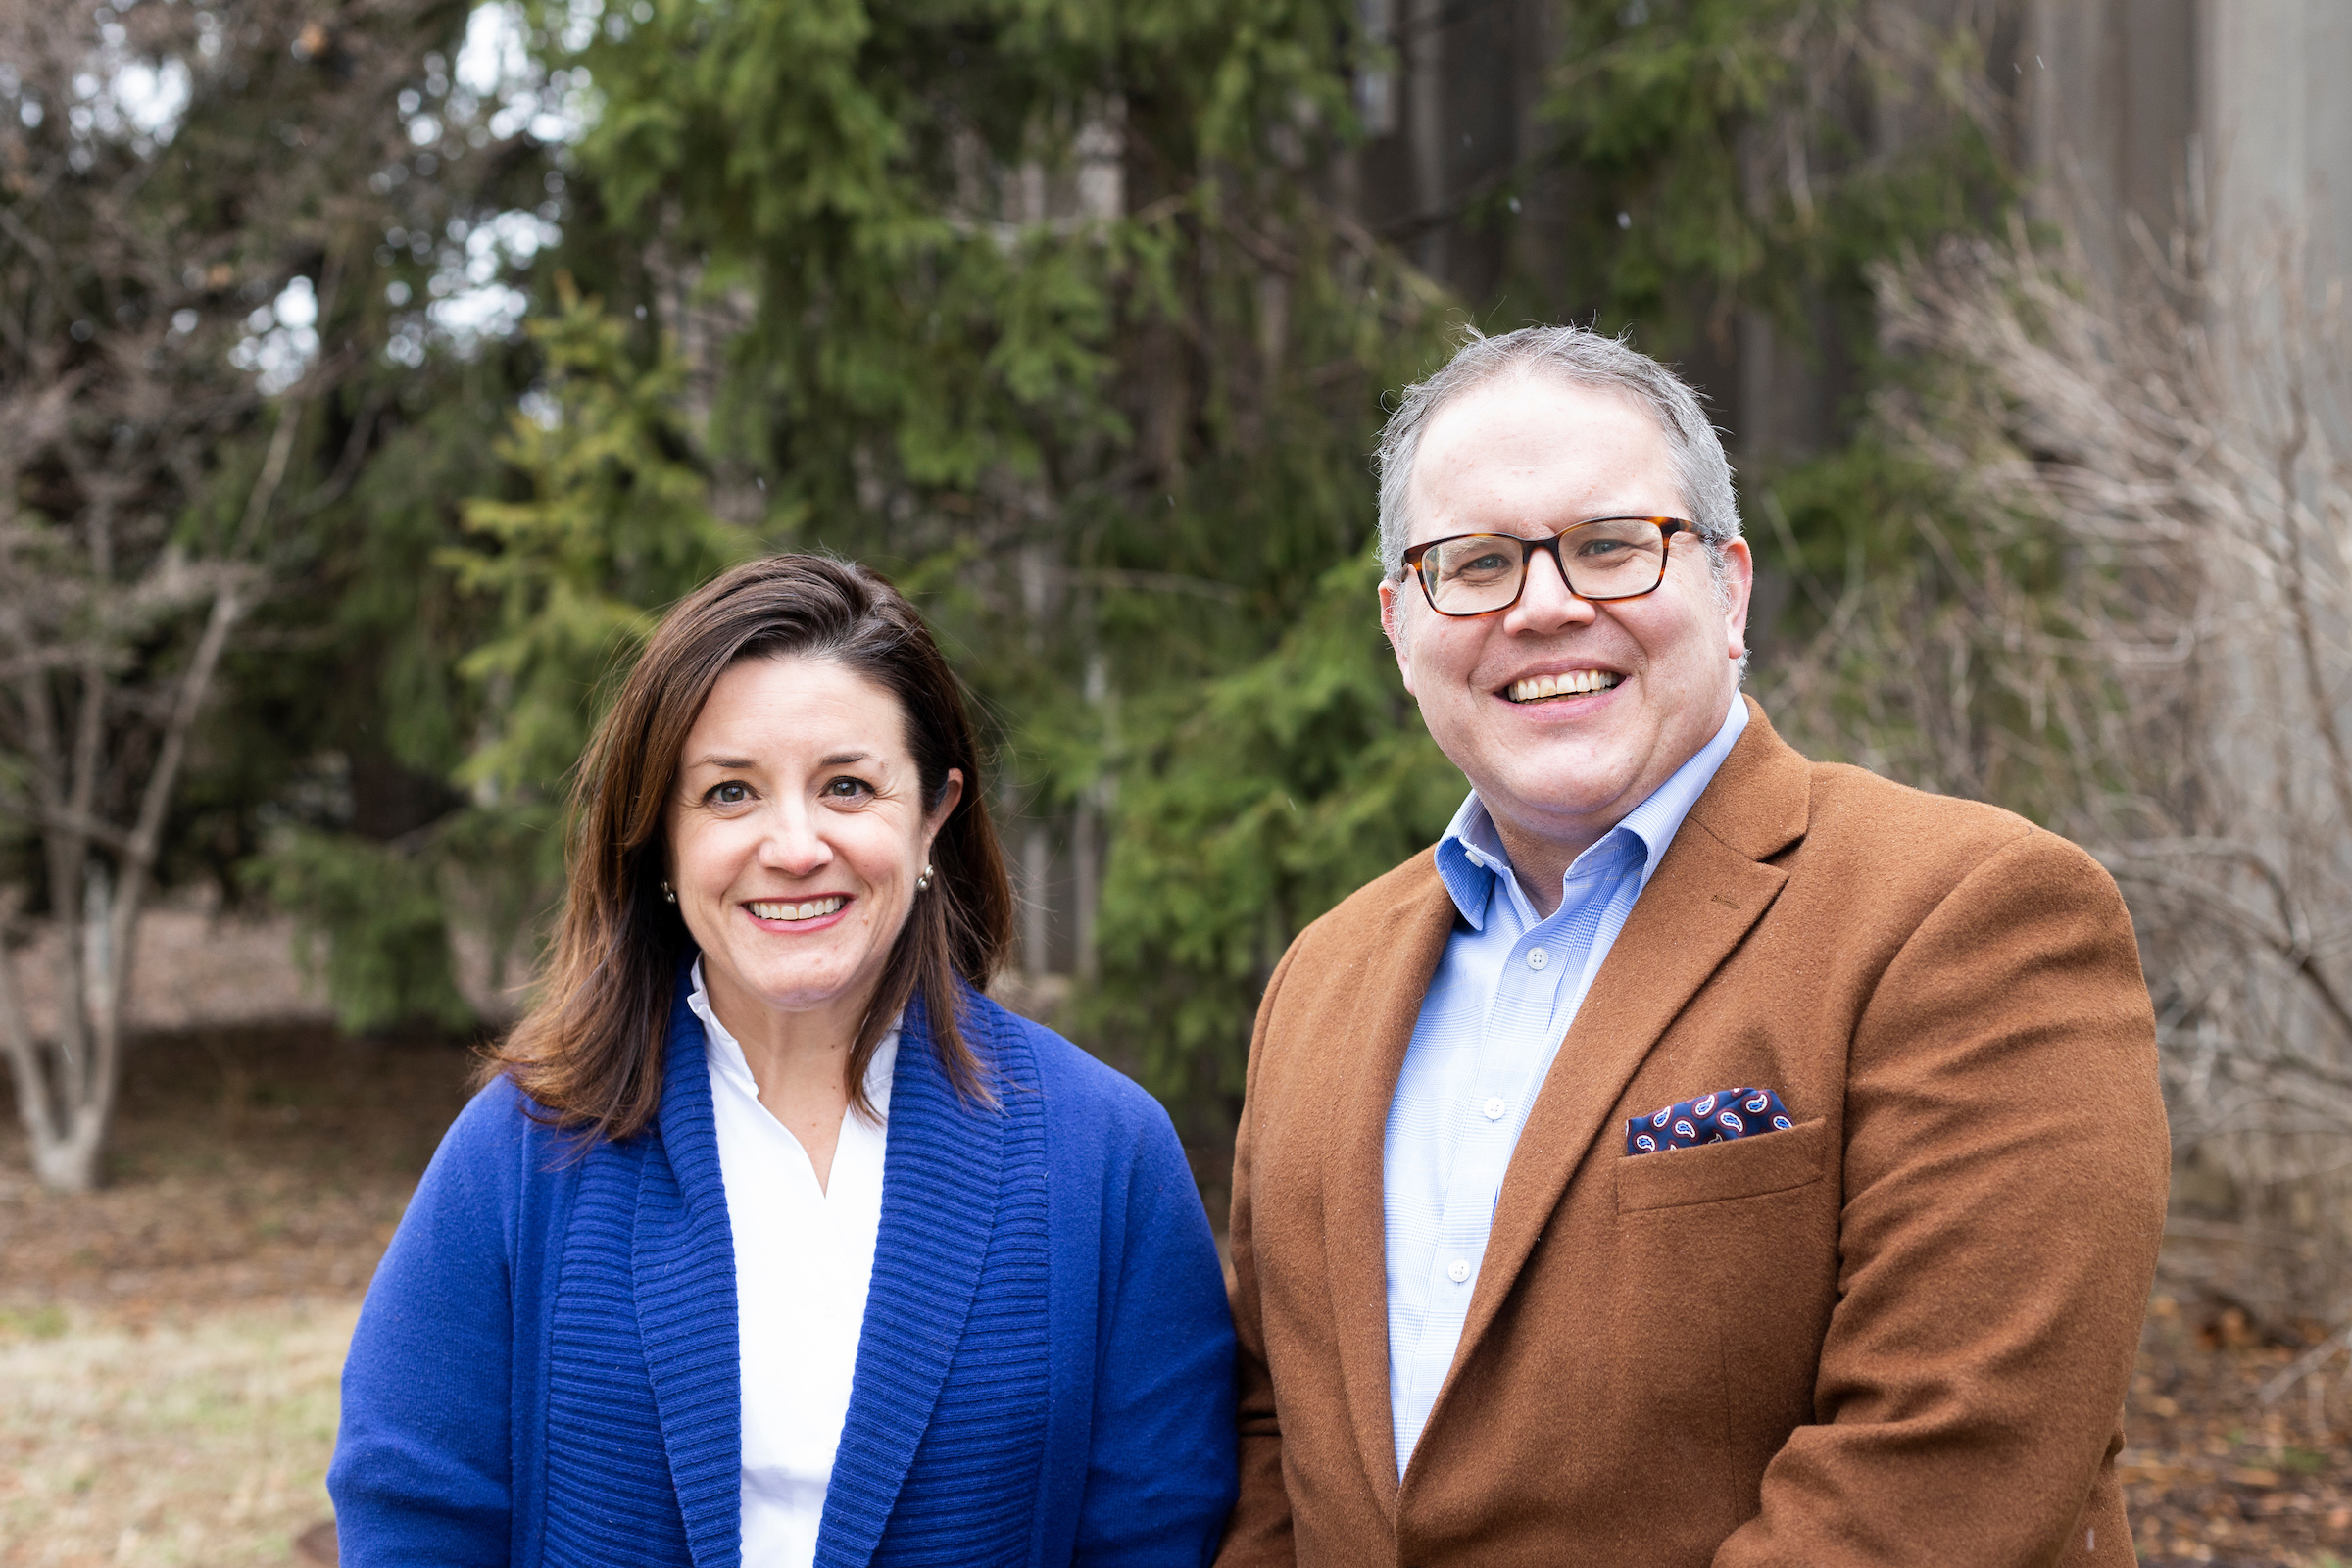 pictured is Dr. Katie Cardarelli and Dr. Marc Kiviniemi outside.